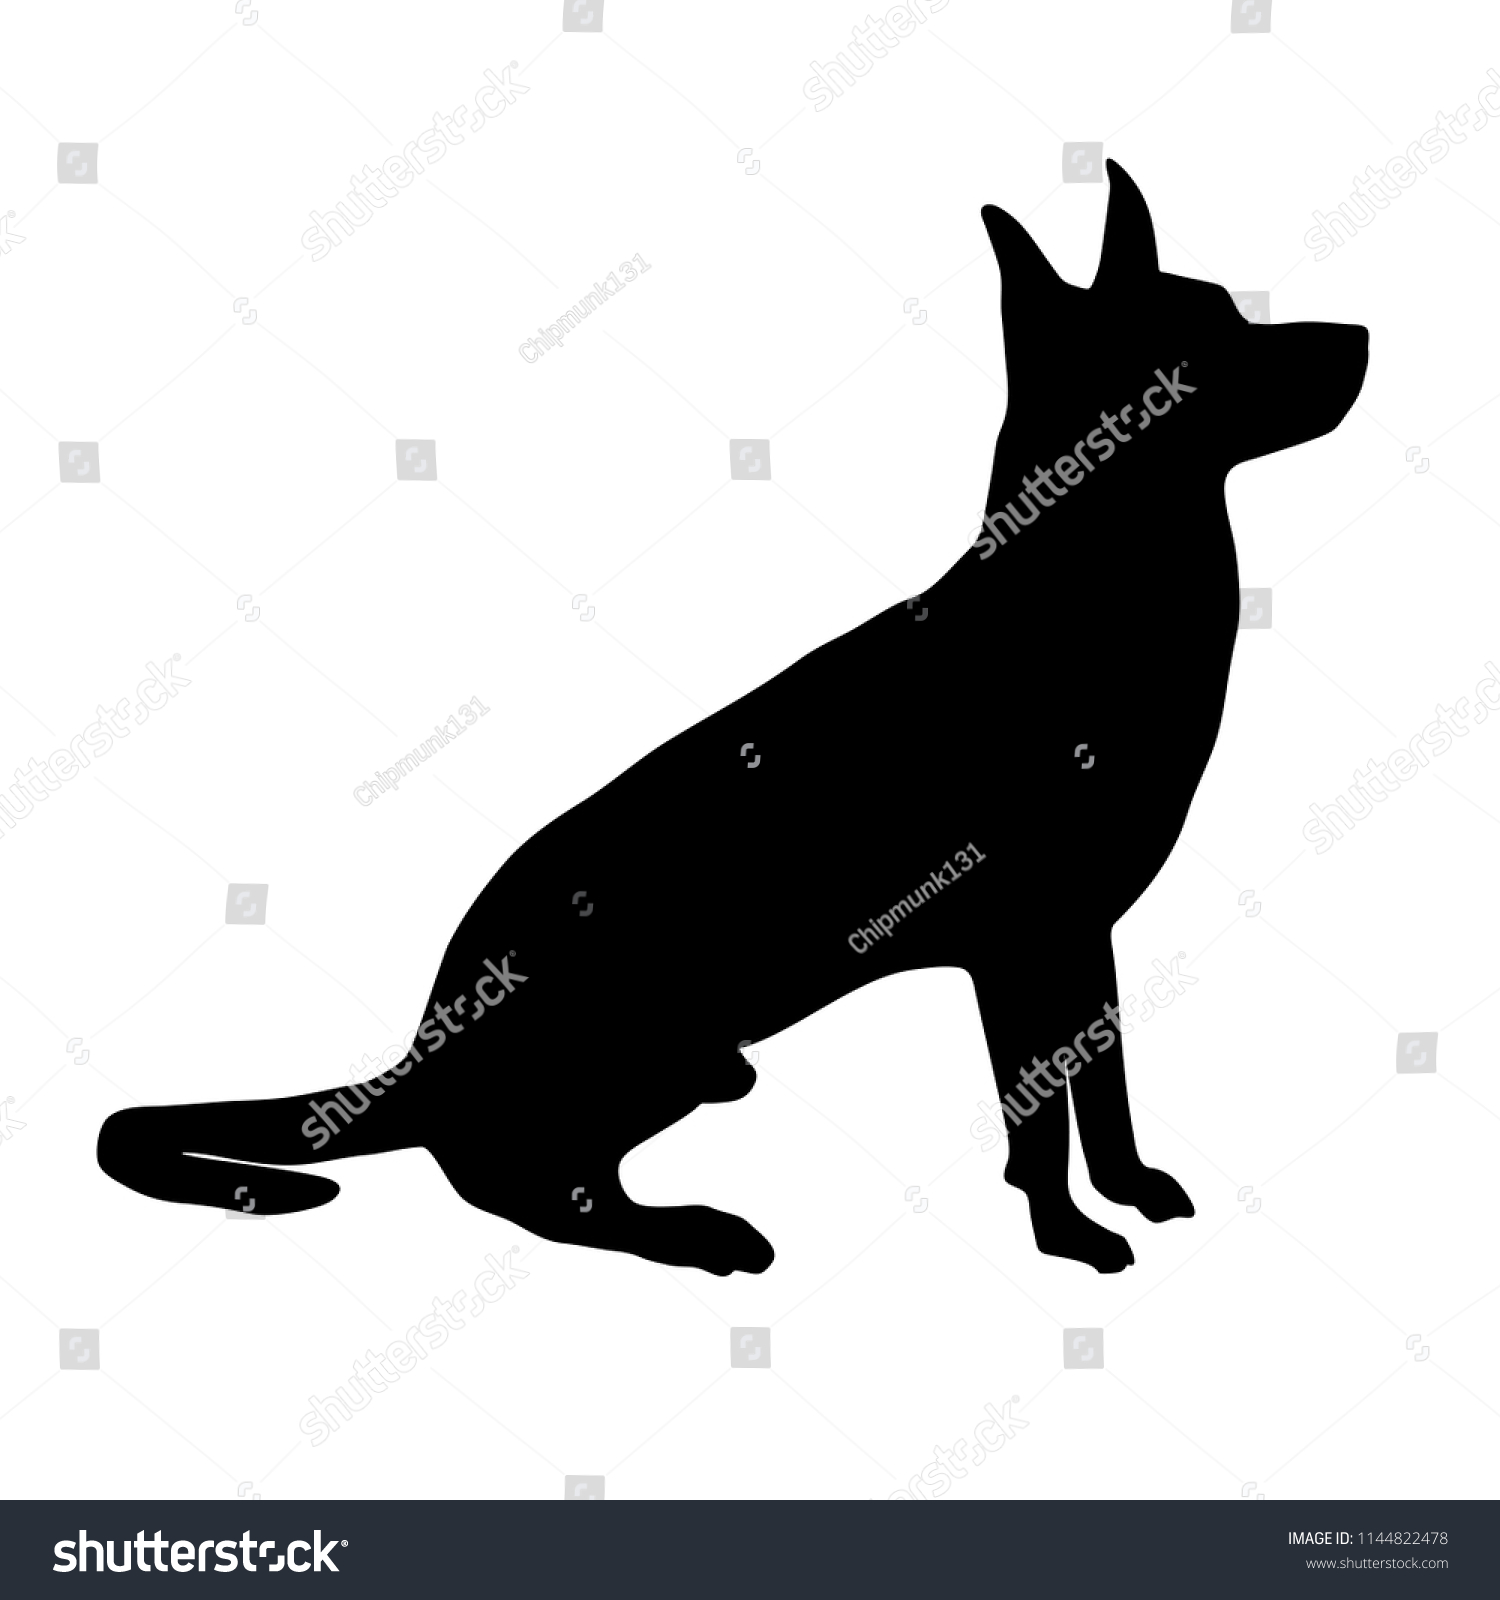 Vector Silhouette Dog Sitting Sheep Dog Stock Vector (Royalty Free ...